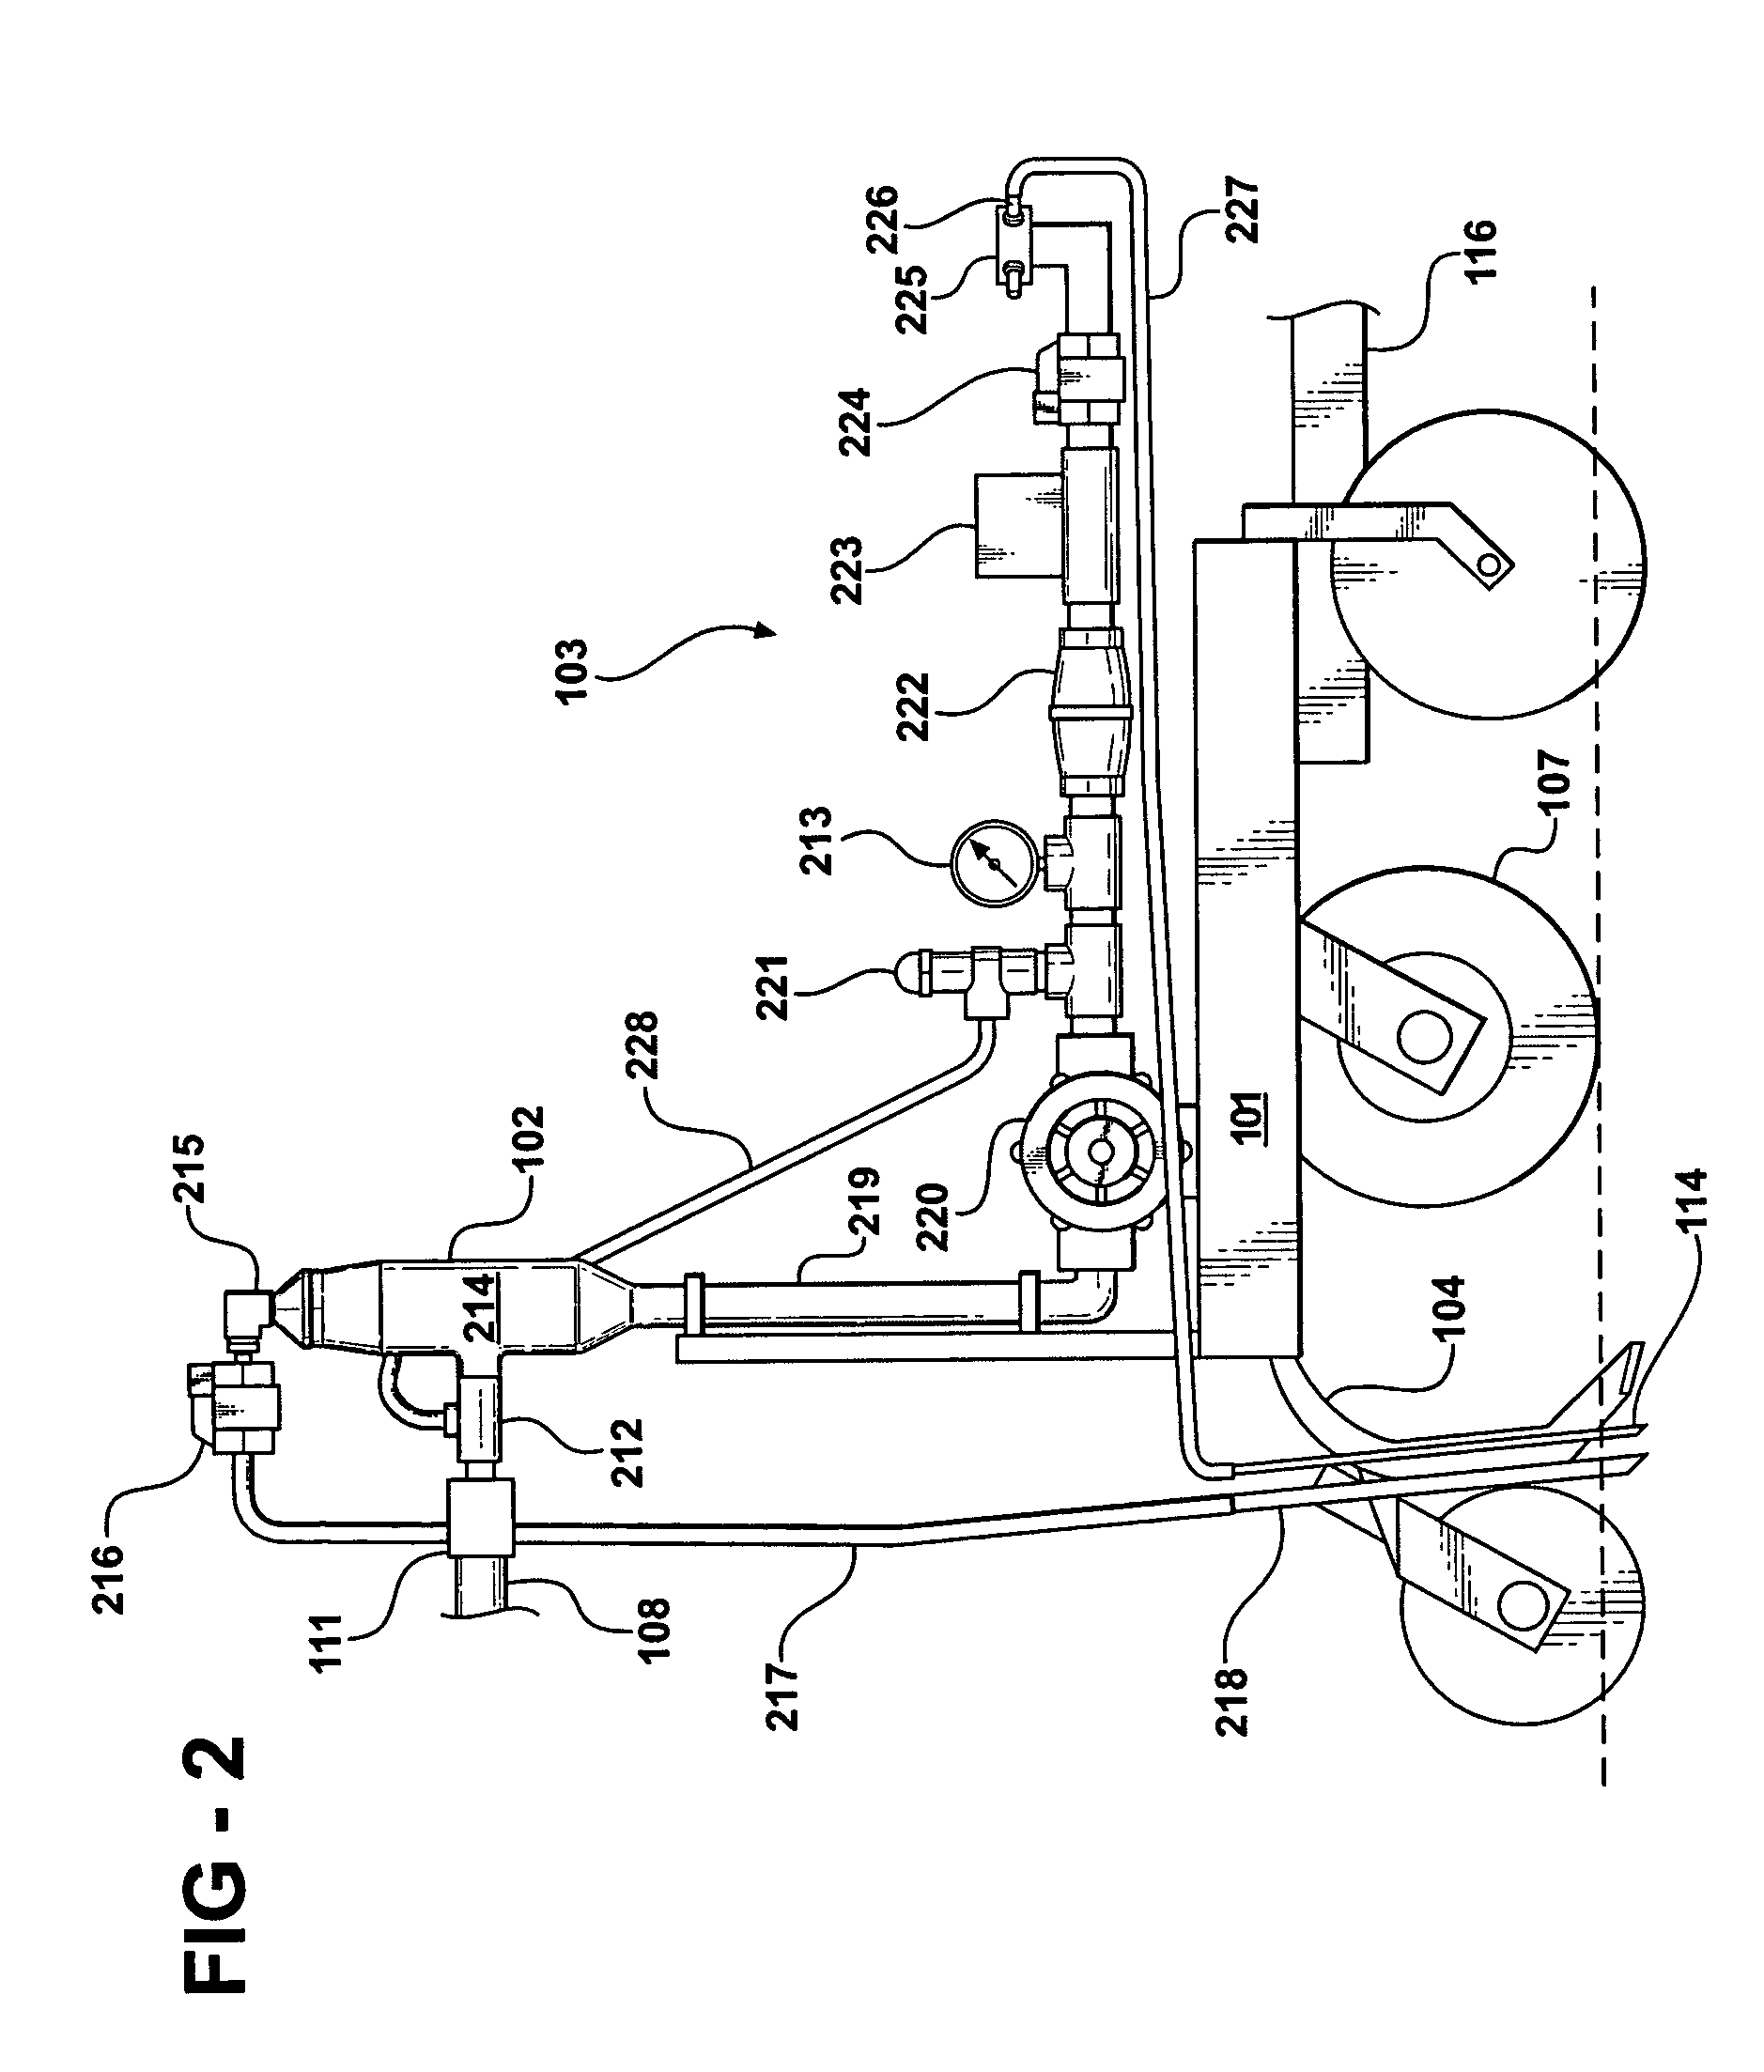 Anhydrous ammonia fertilizer flow control apparatus and method